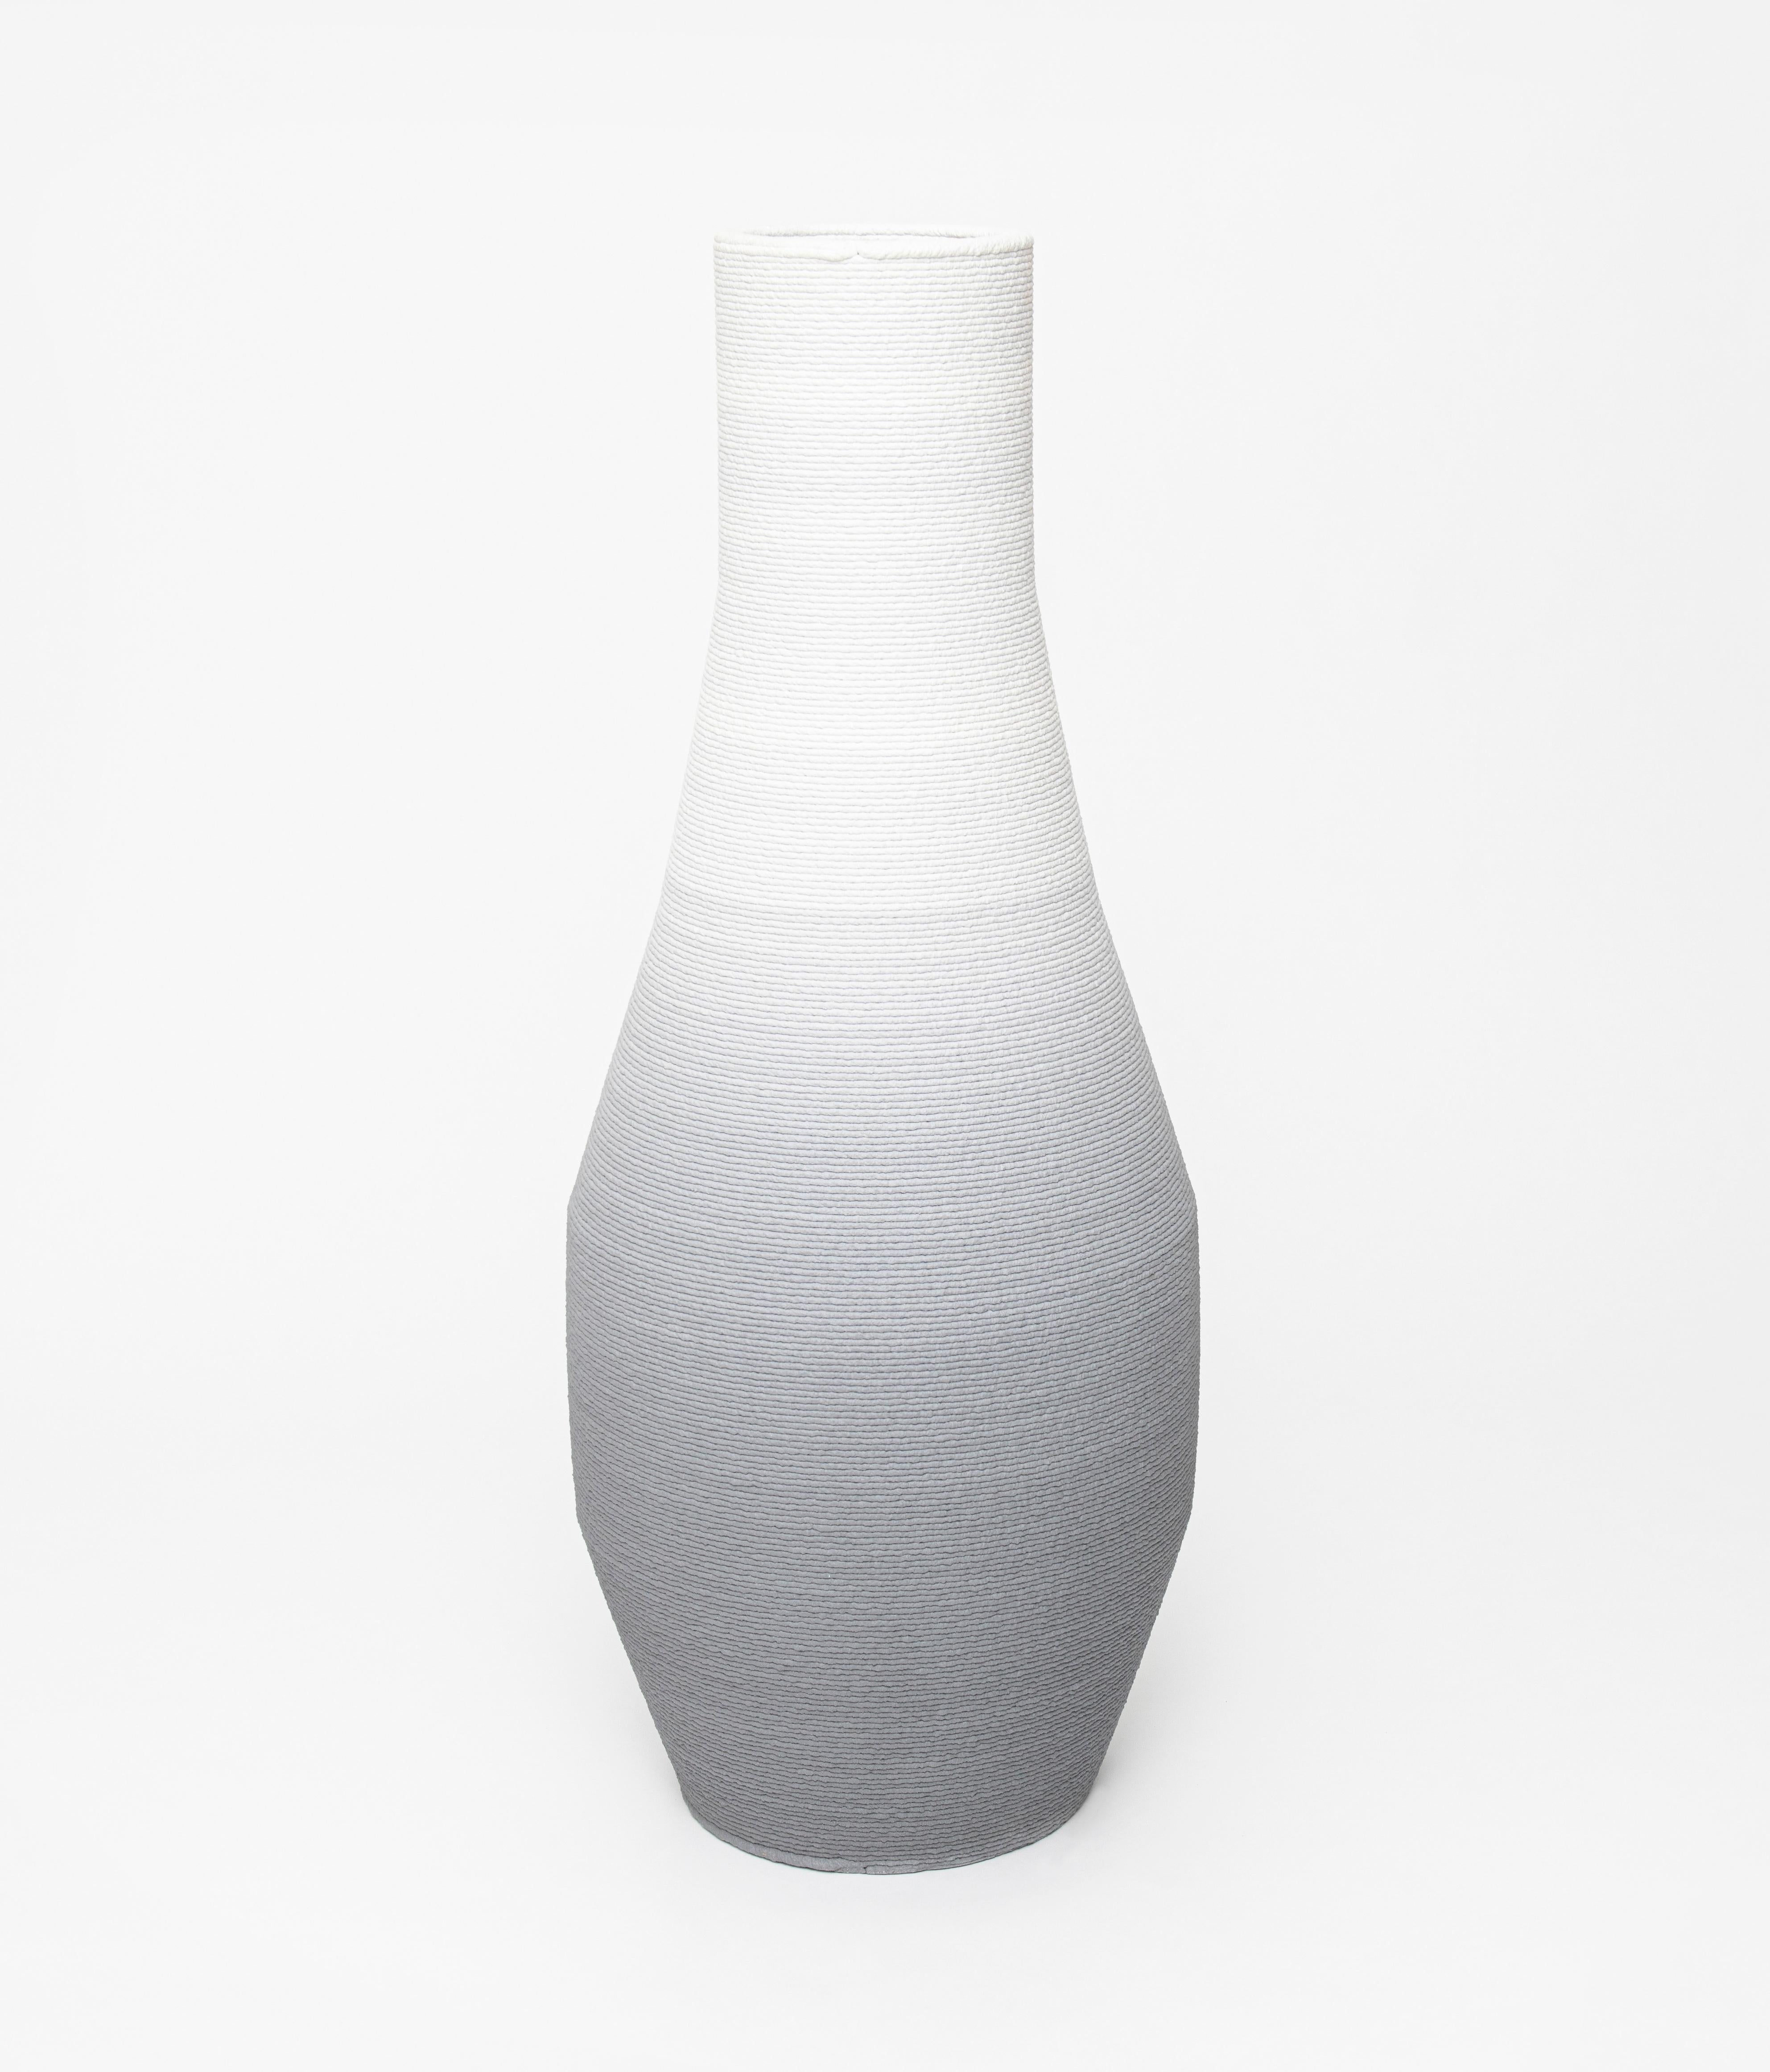 Large gradient vase by Philipp Aduatz
Limited Edition of 50
Dimensions: 60 x 60 x 152 cm
Materials: 3D printed concrete dyed, reinforced with steel

Available in red, blue, beige, green and black.

The 3D printed gradient furniture collection